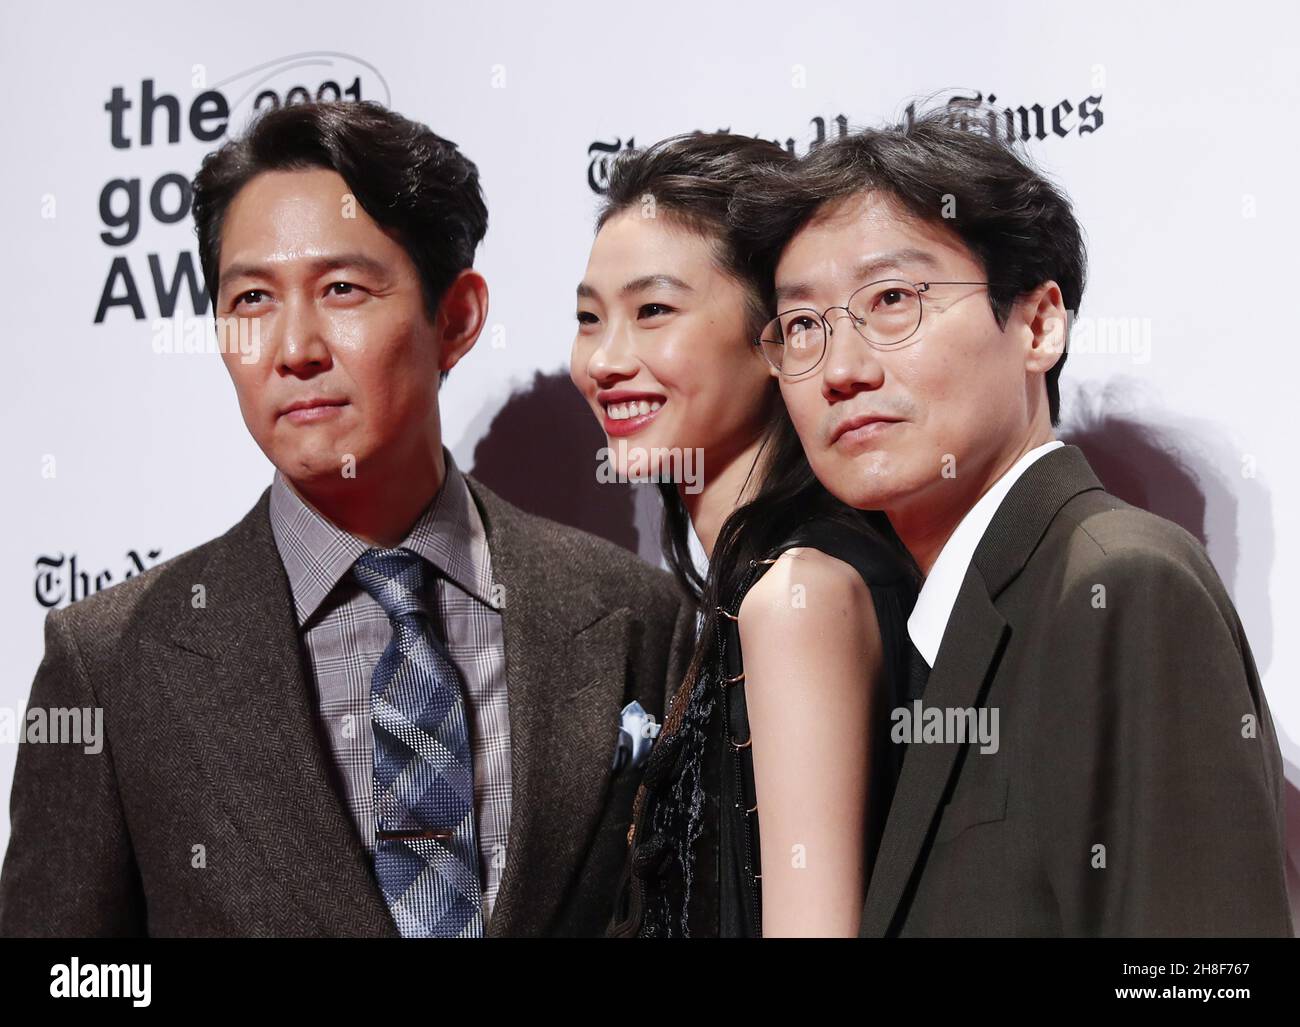 New York, United States. 29th Nov, 2021. Lee Jung-jae, Jung Ho-yeon and Hwang Dong-hyuk arrive on the red carpet at the 2021 Gotham Awards presented by The Gotham Film & Media Institute at Cipriani Wall Street in New York City on Monday, November 29, 2021. Photo by John Angelillo/UPI Credit: UPI/Alamy Live News Stock Photo